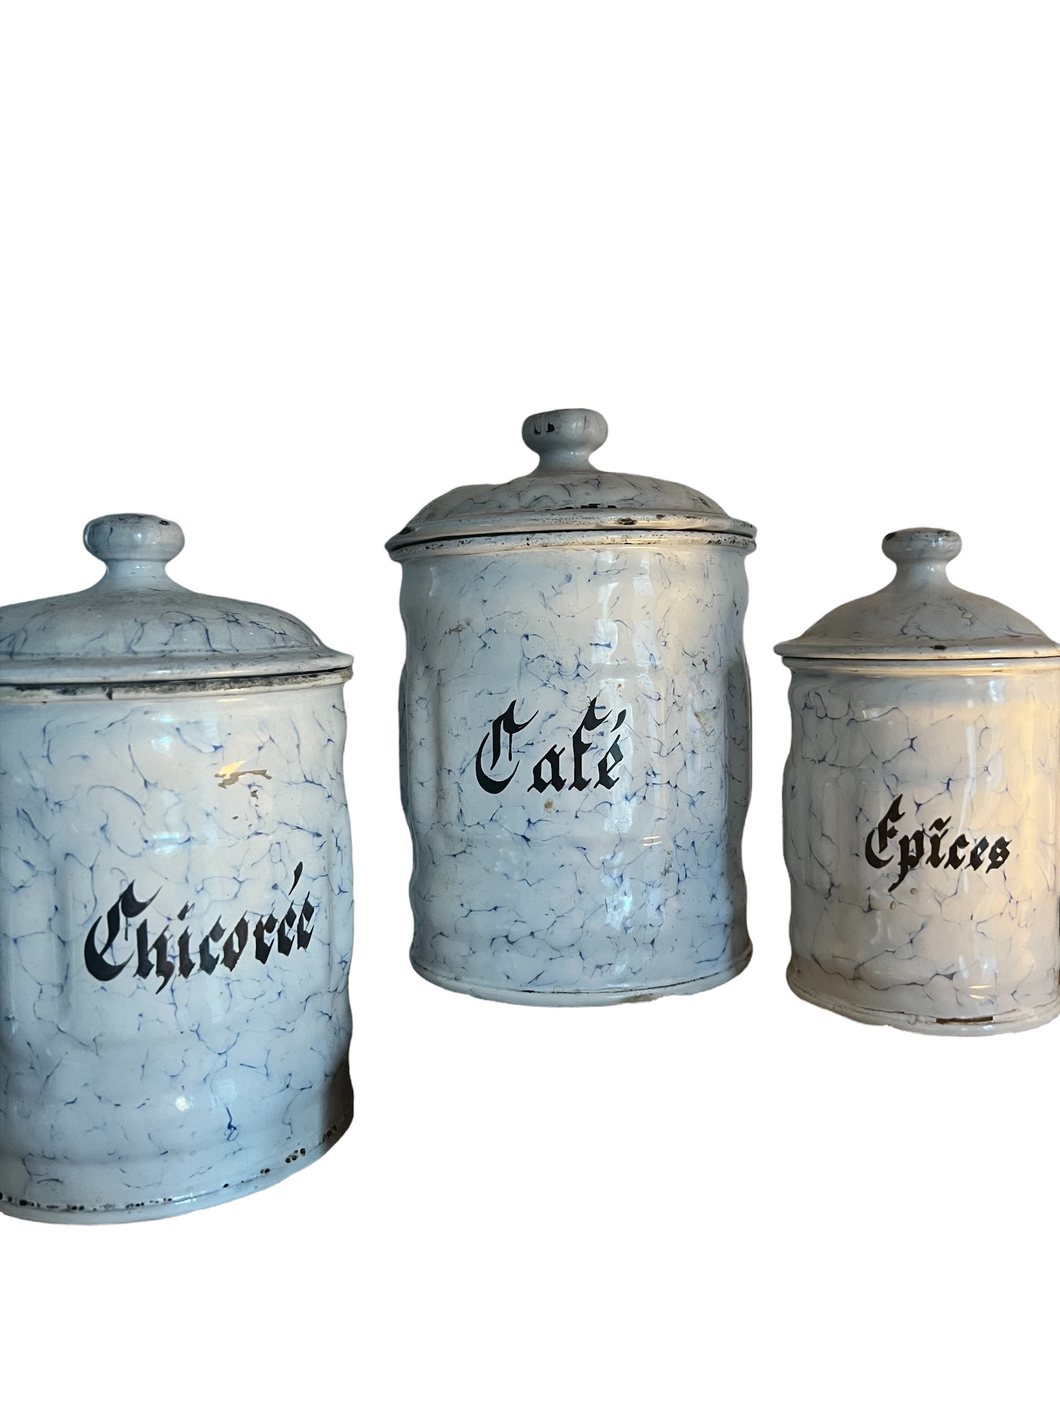 French Enamel Canisters